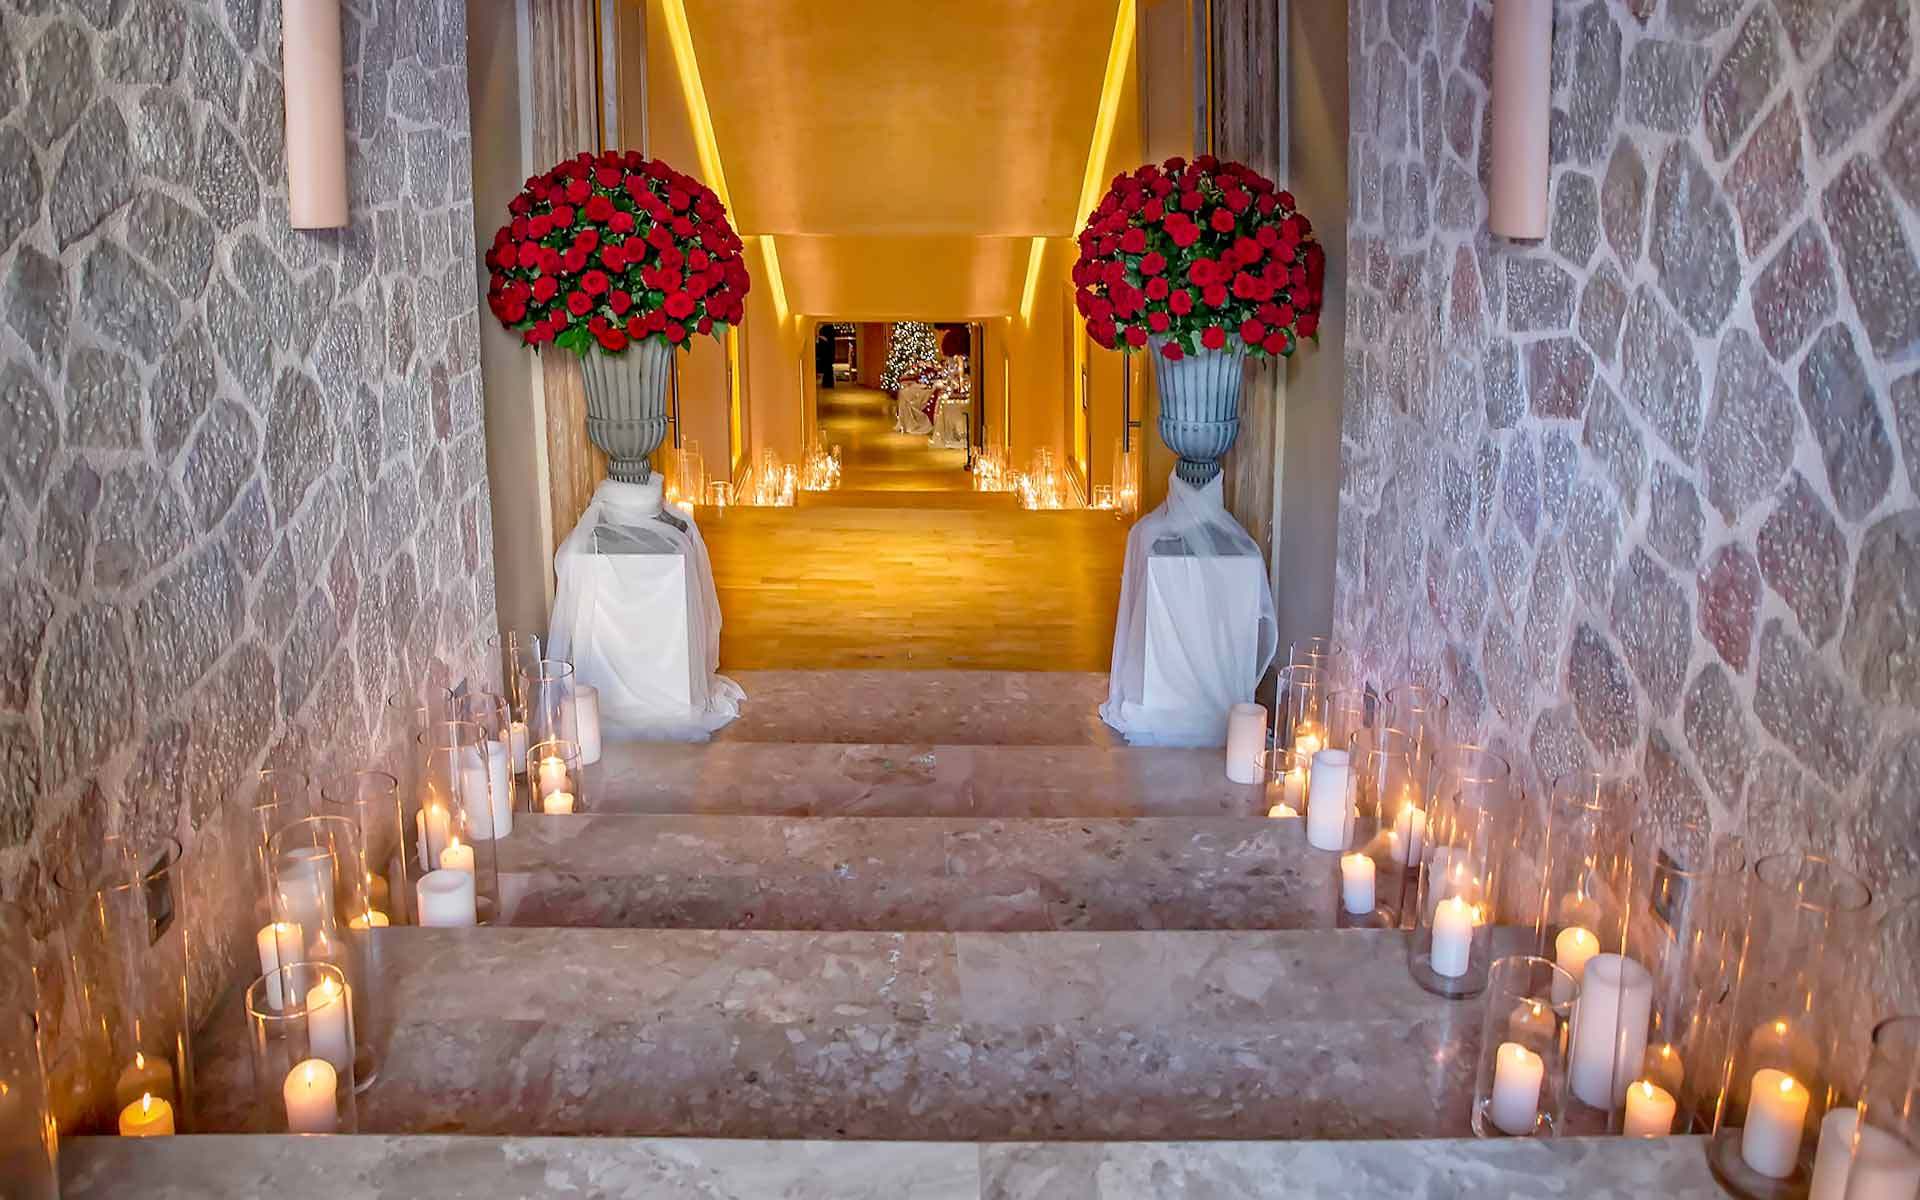 Entrance-Of-Candles-And-Red-Roses-For-A-Royal-Wedding